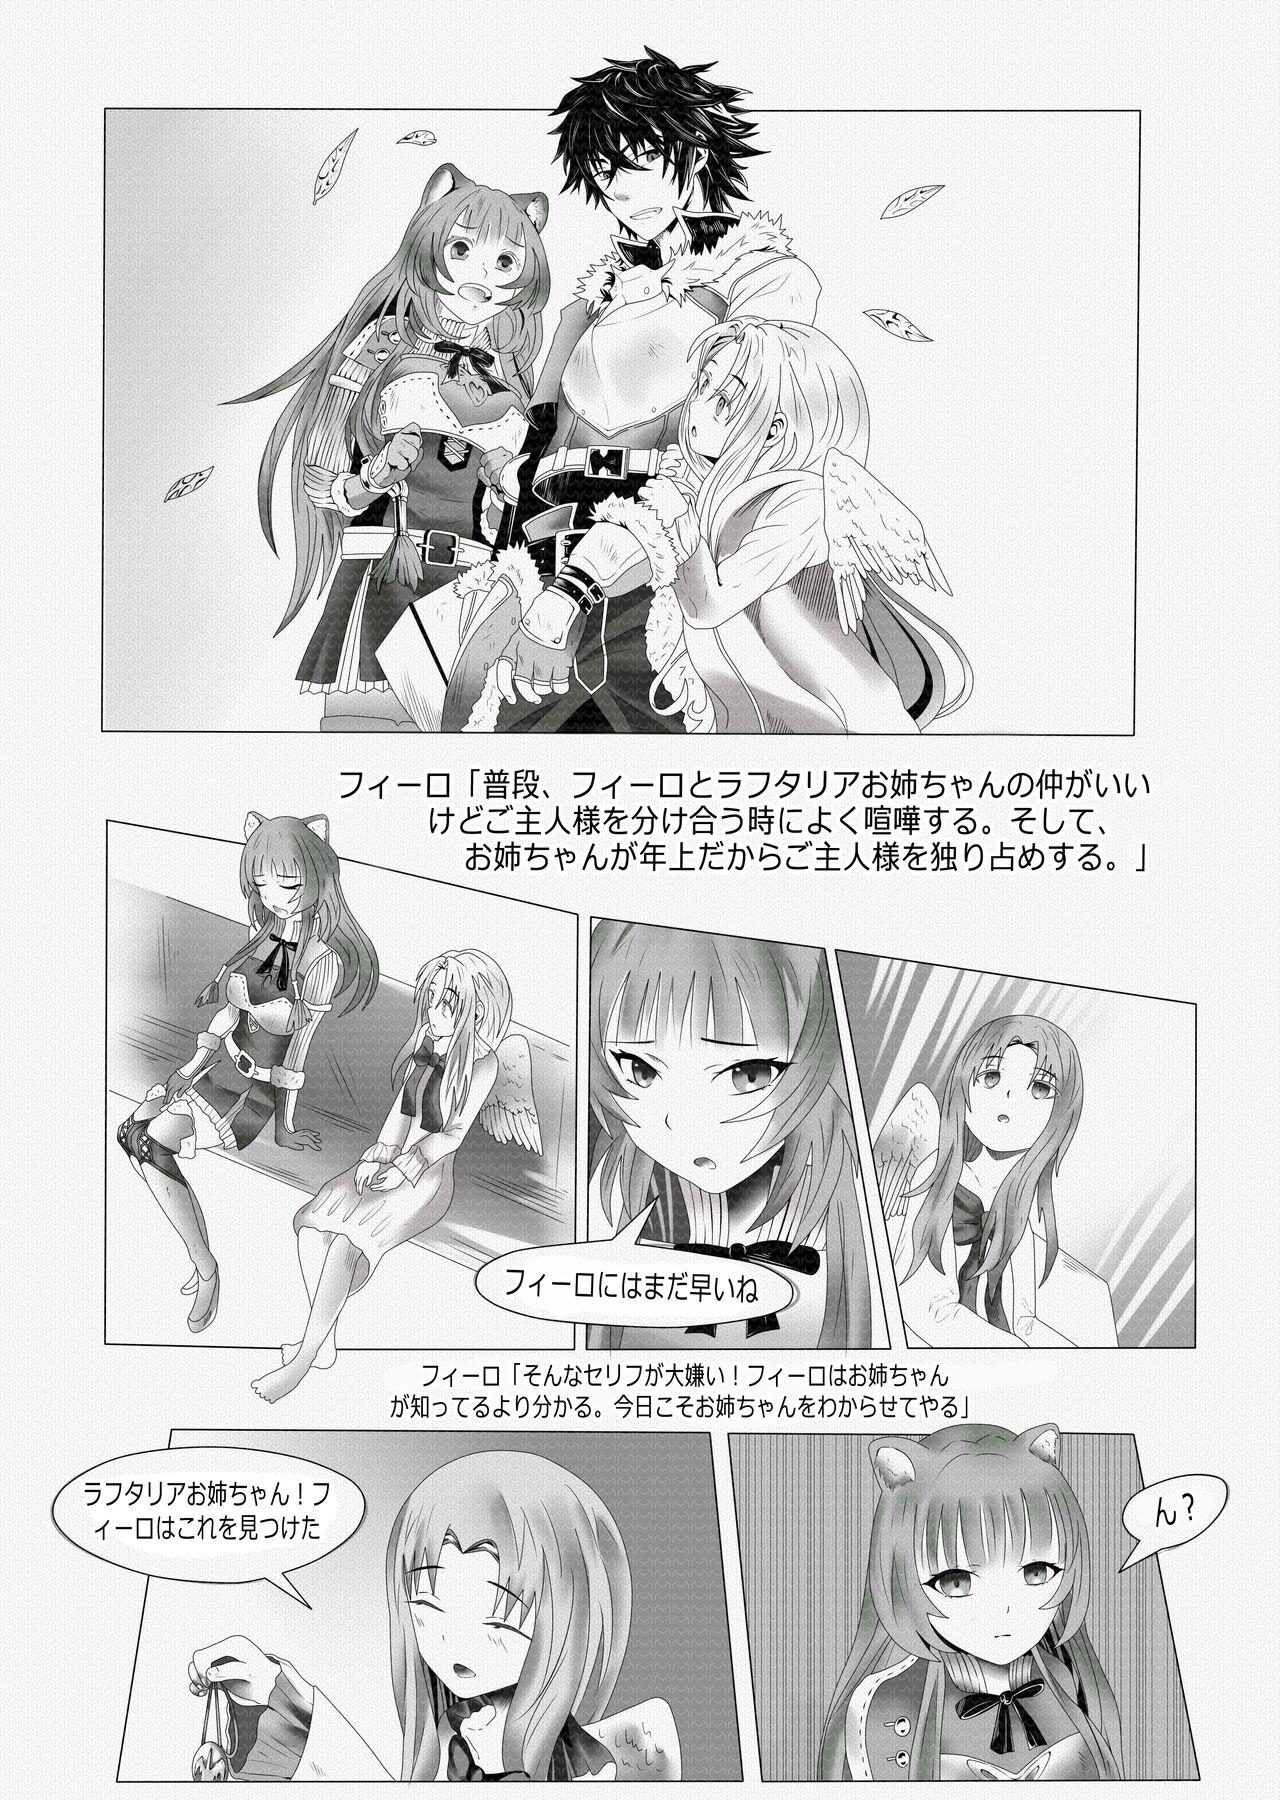 Young Tits The Rising Of The Shield Hero - Happy Point with My Sister and Teacher - Tate no yuusha no nariagari | the rising of the shield hero Fake Tits - Page 2